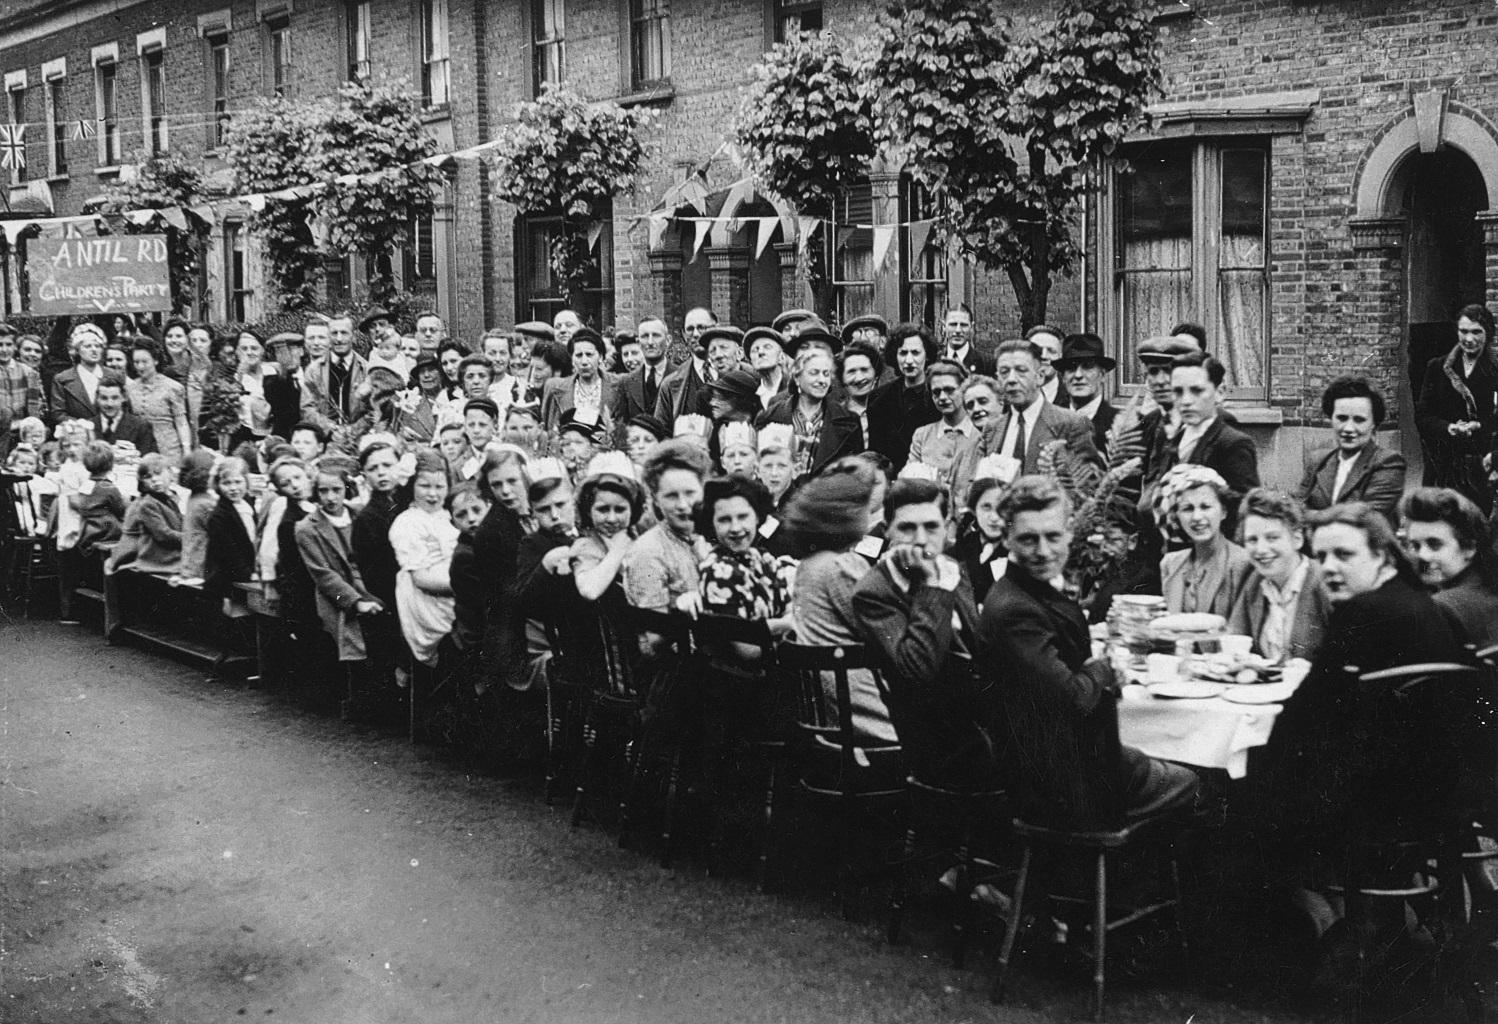 VE Day street party at Antill Road in Tottenham 1945